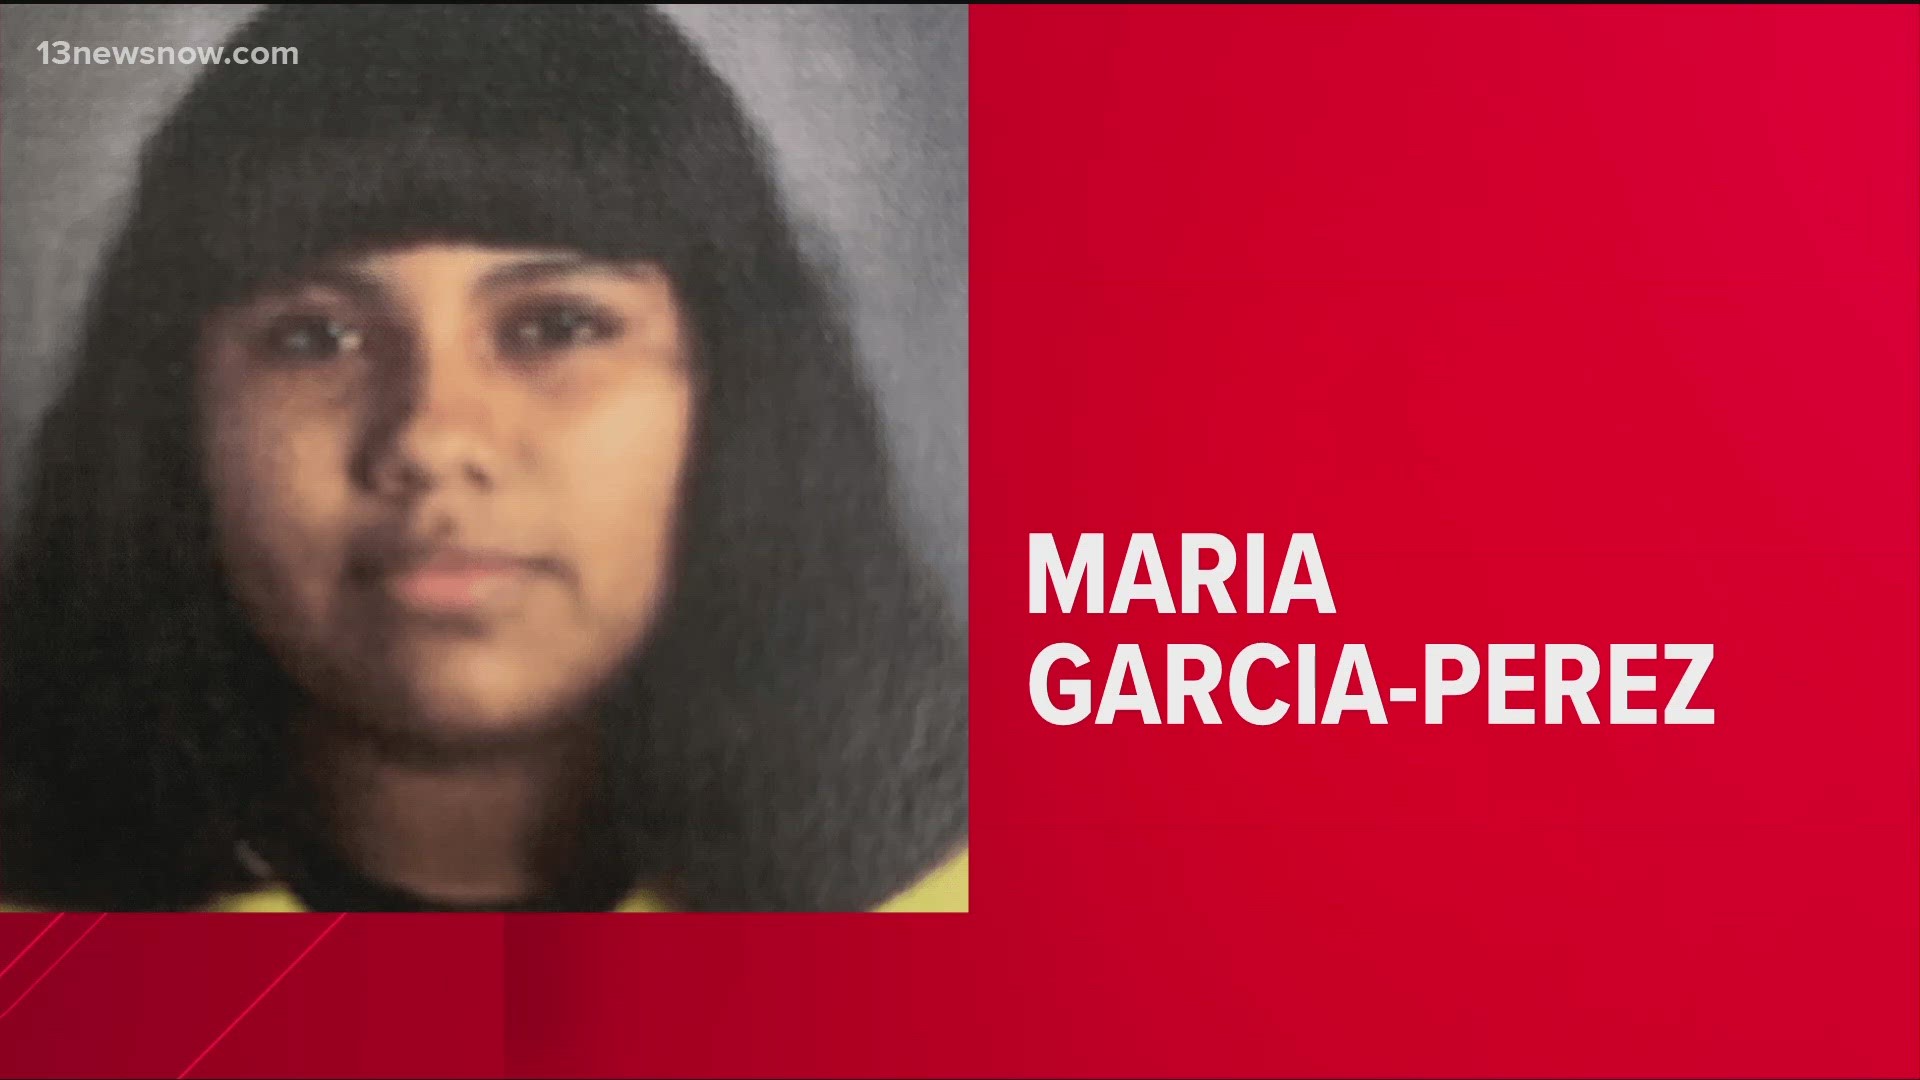 No one has seen 14-year-old Maria Garcia-Perez in almost a week.